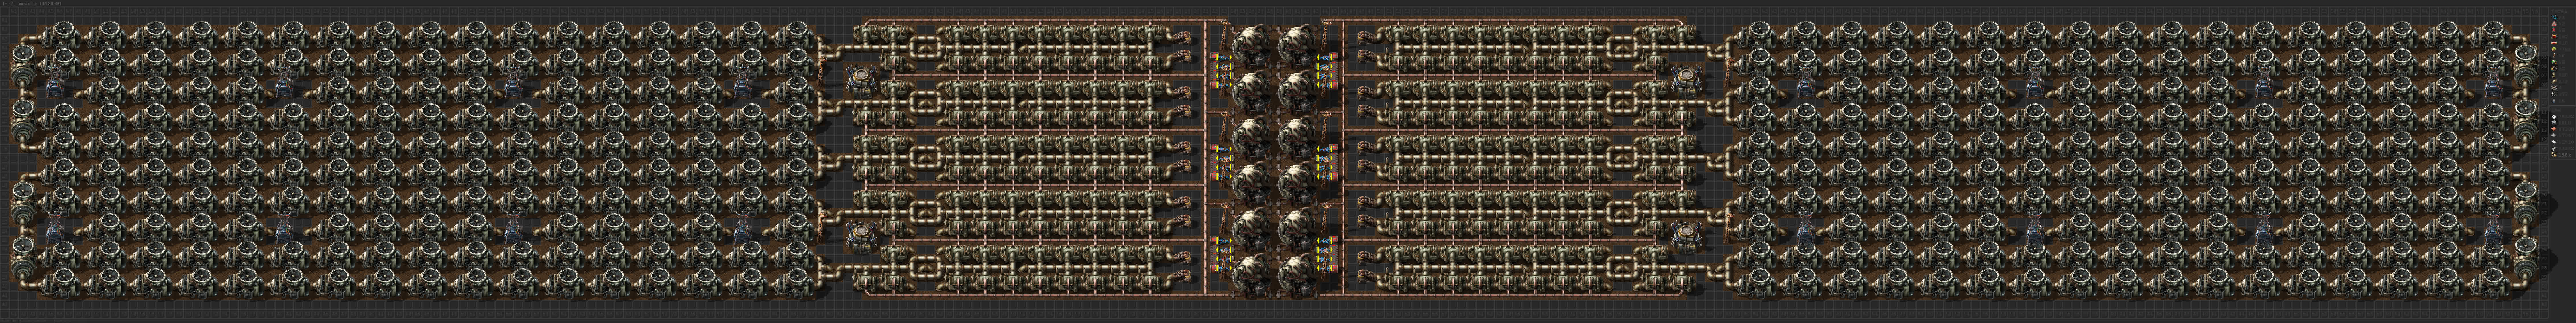 A tileable 2x6 nuclear plant section that produces 1920MW.